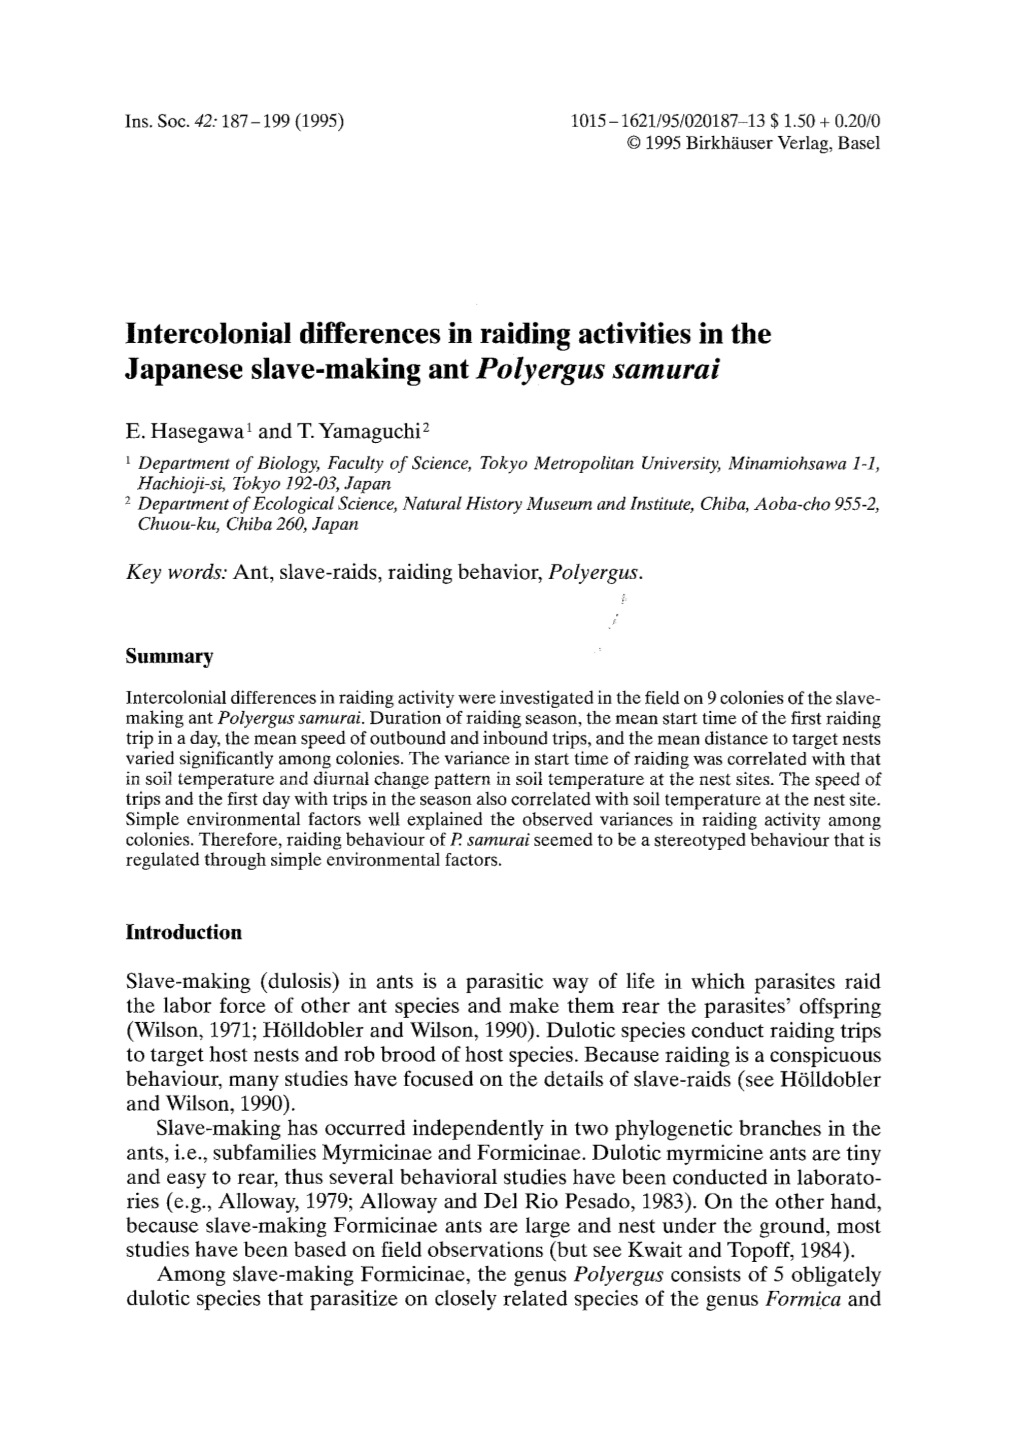 Intercolonial Differences in Raiding Activities in the Japanese Slave-Making Ant &lt;Emphasis Type="Italic"&gt;Polyerg